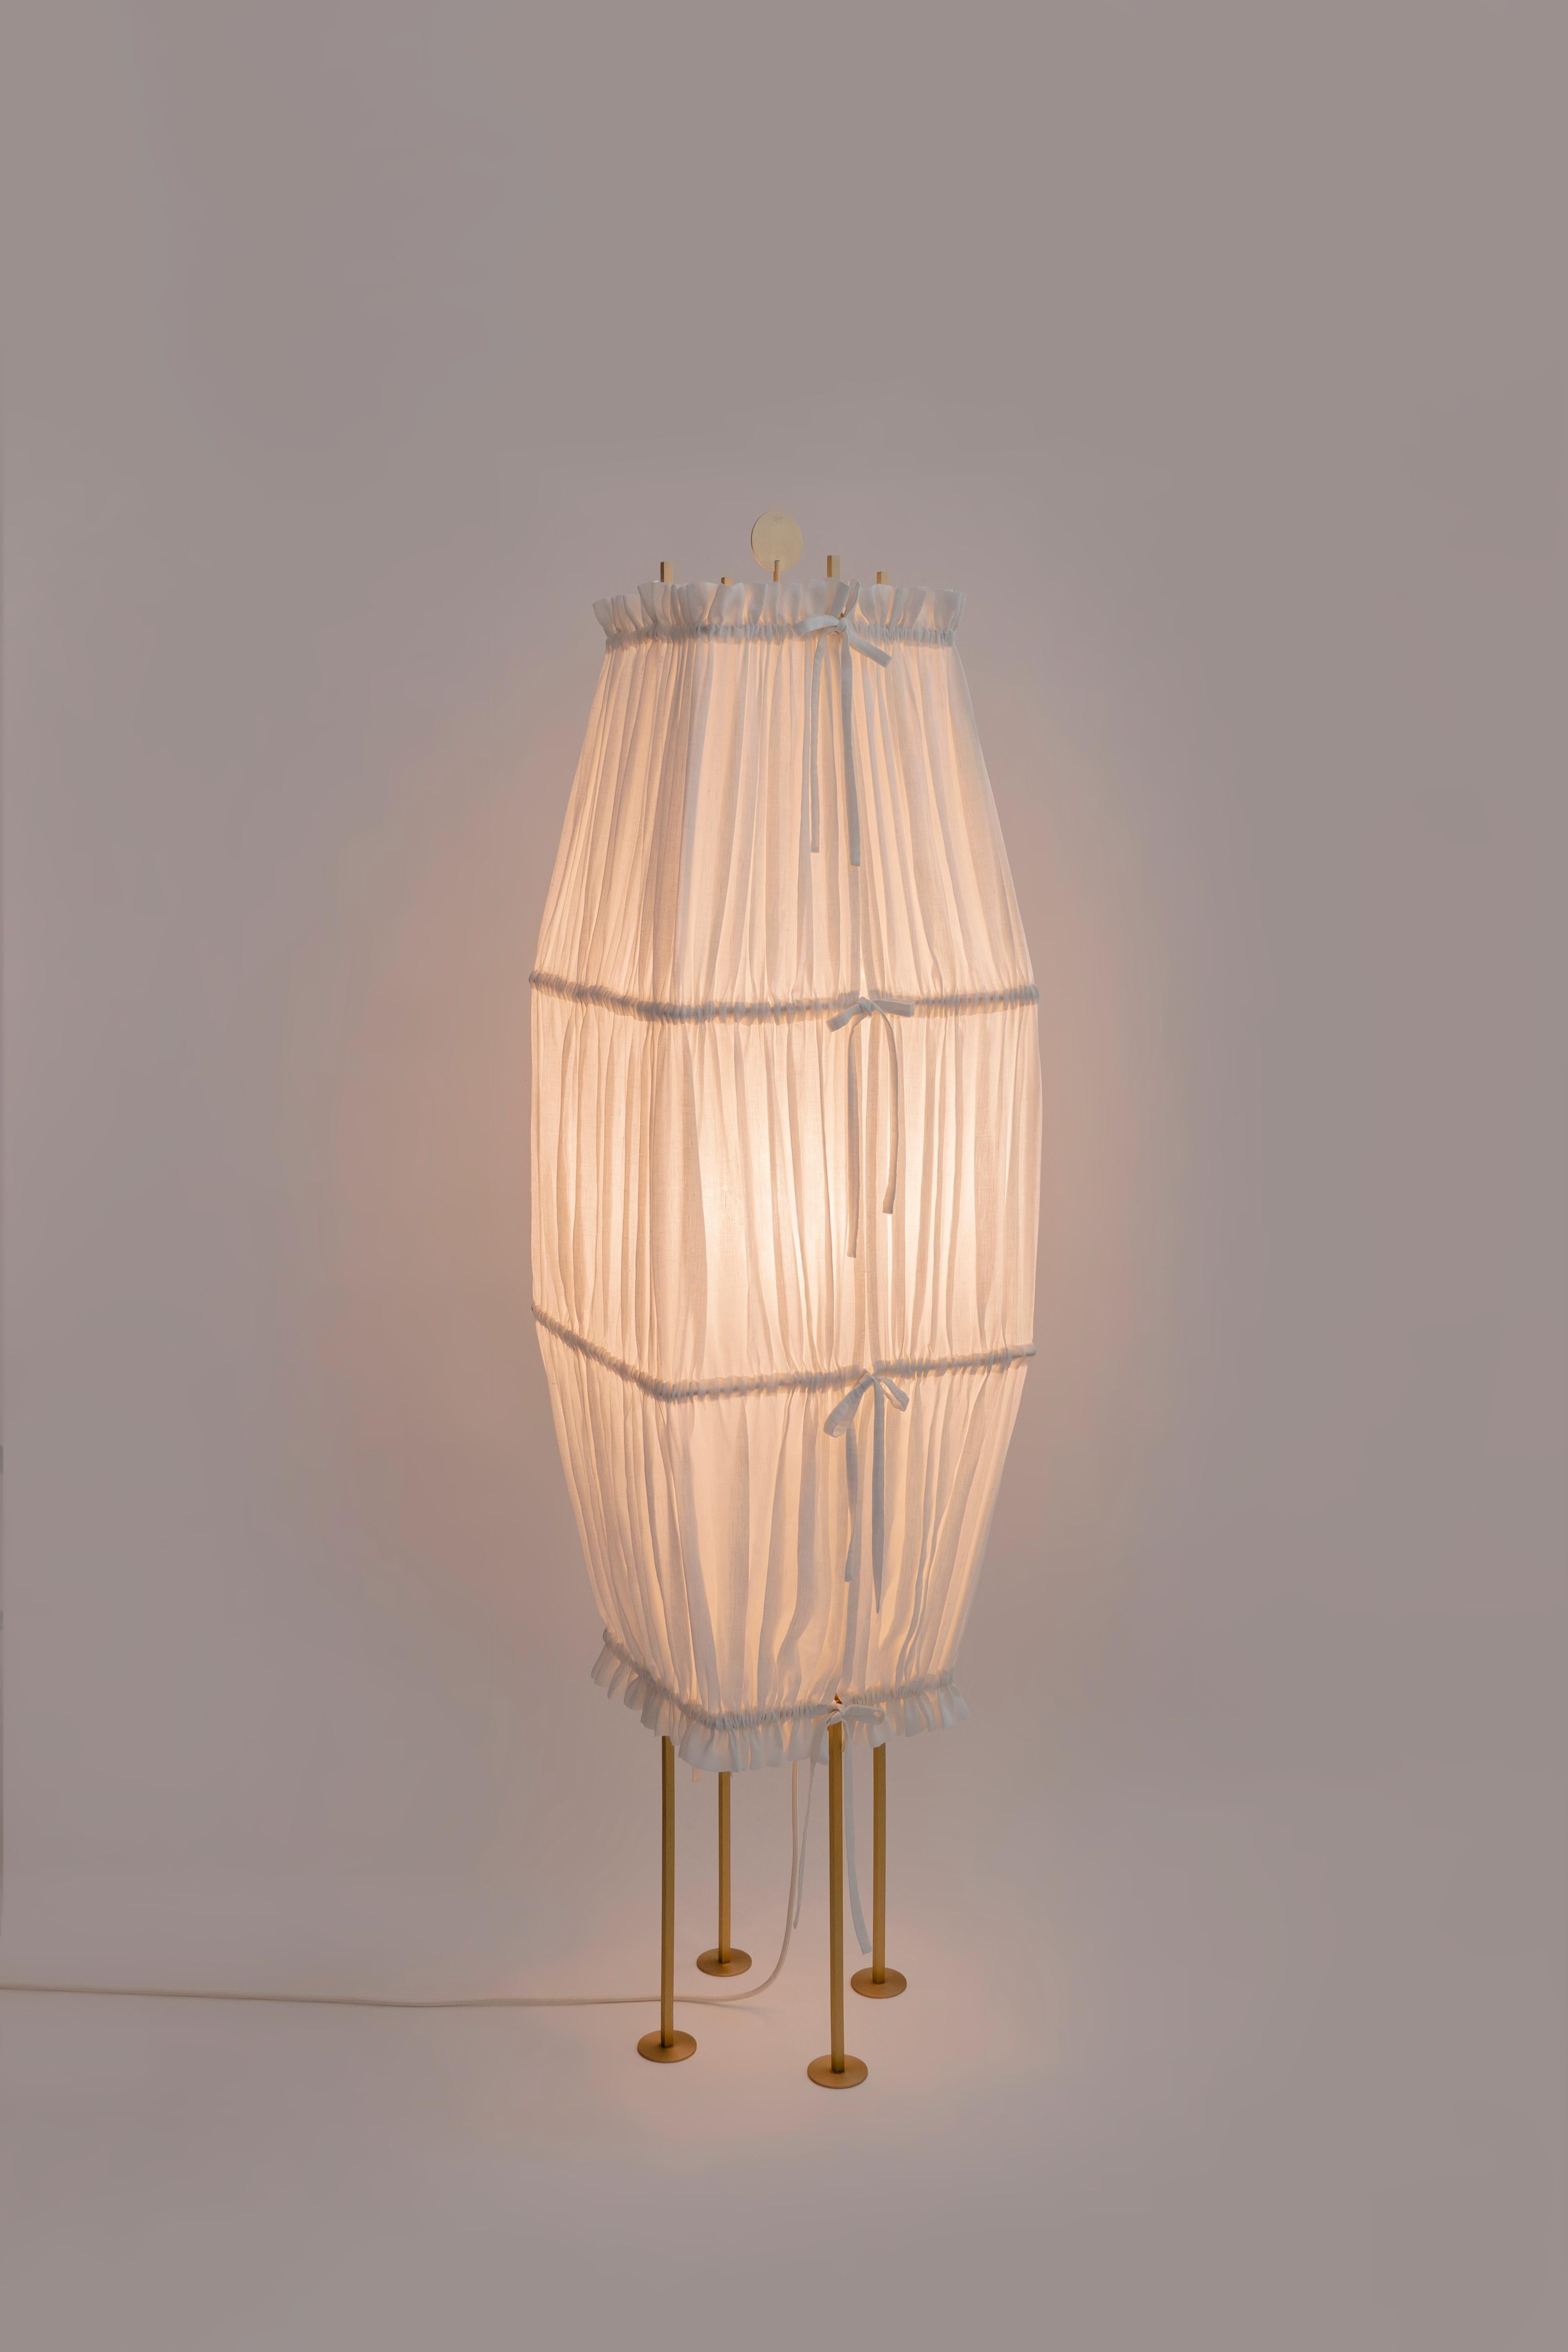 Other Large Presenza Floor Lamp by Agustina Bottoni For Sale